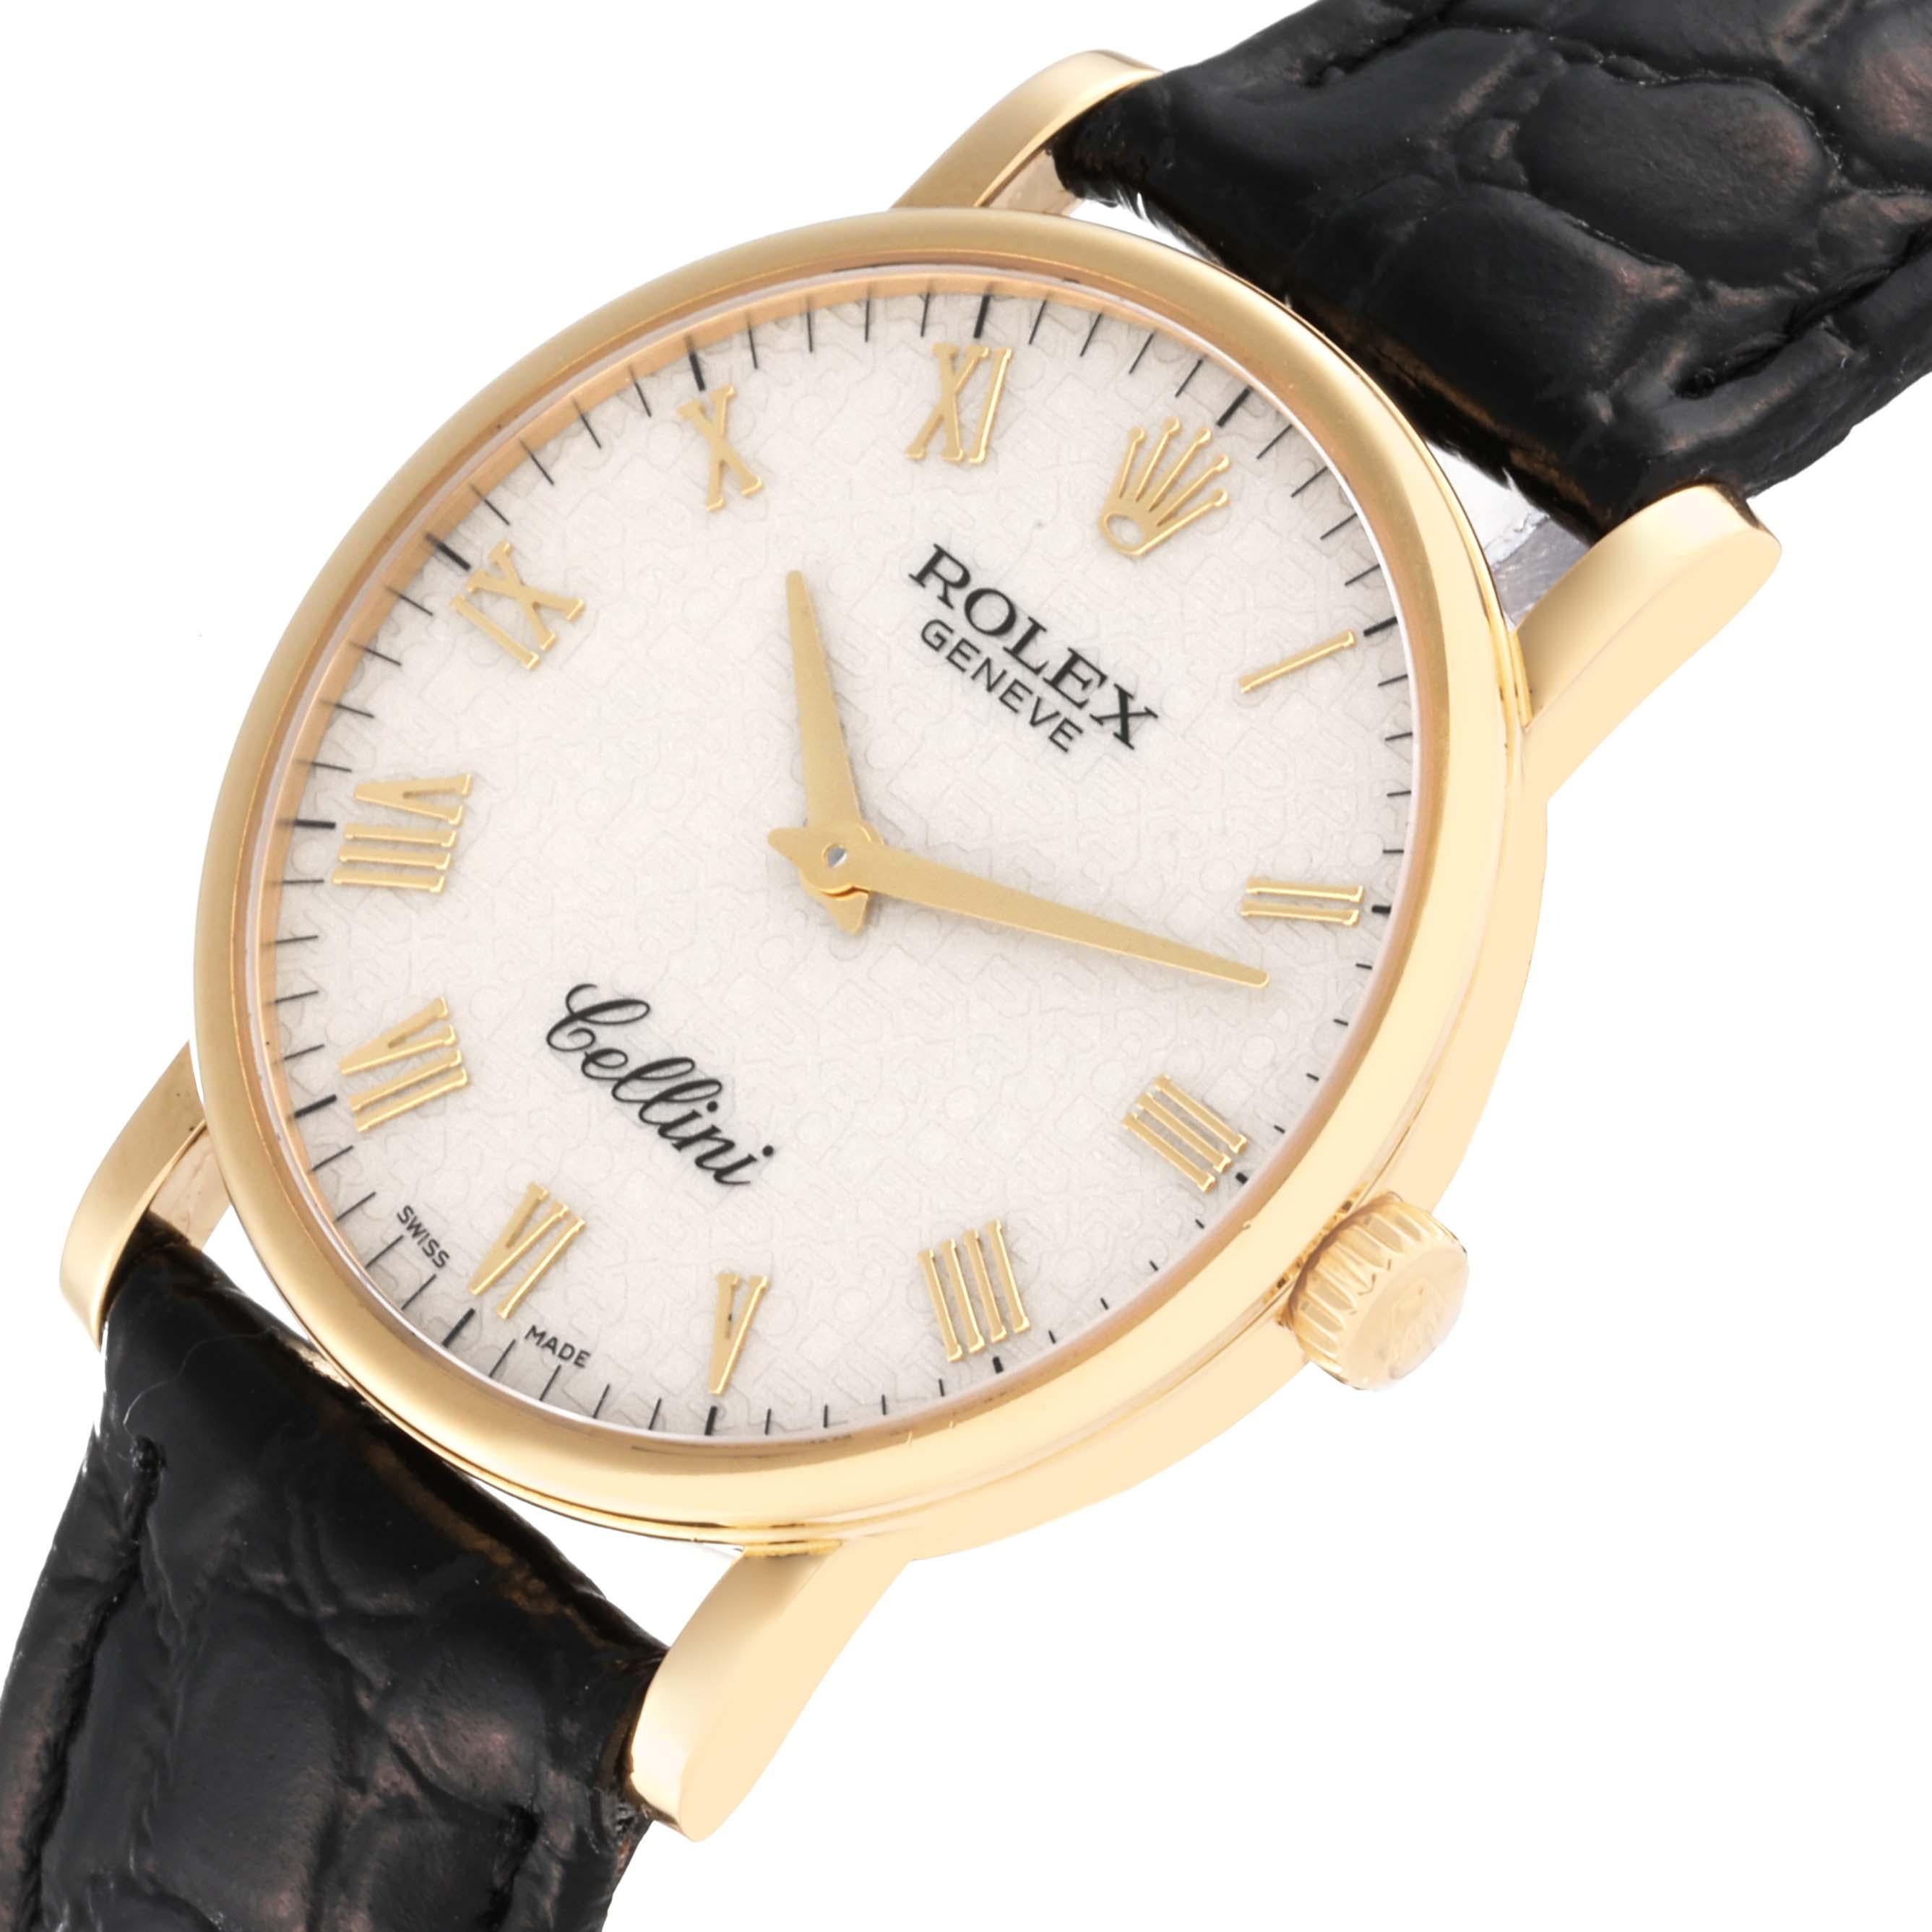 Rolex Cellini Classic Yellow Gold Ivory Anniversary Dial Mens Watch 5115 1